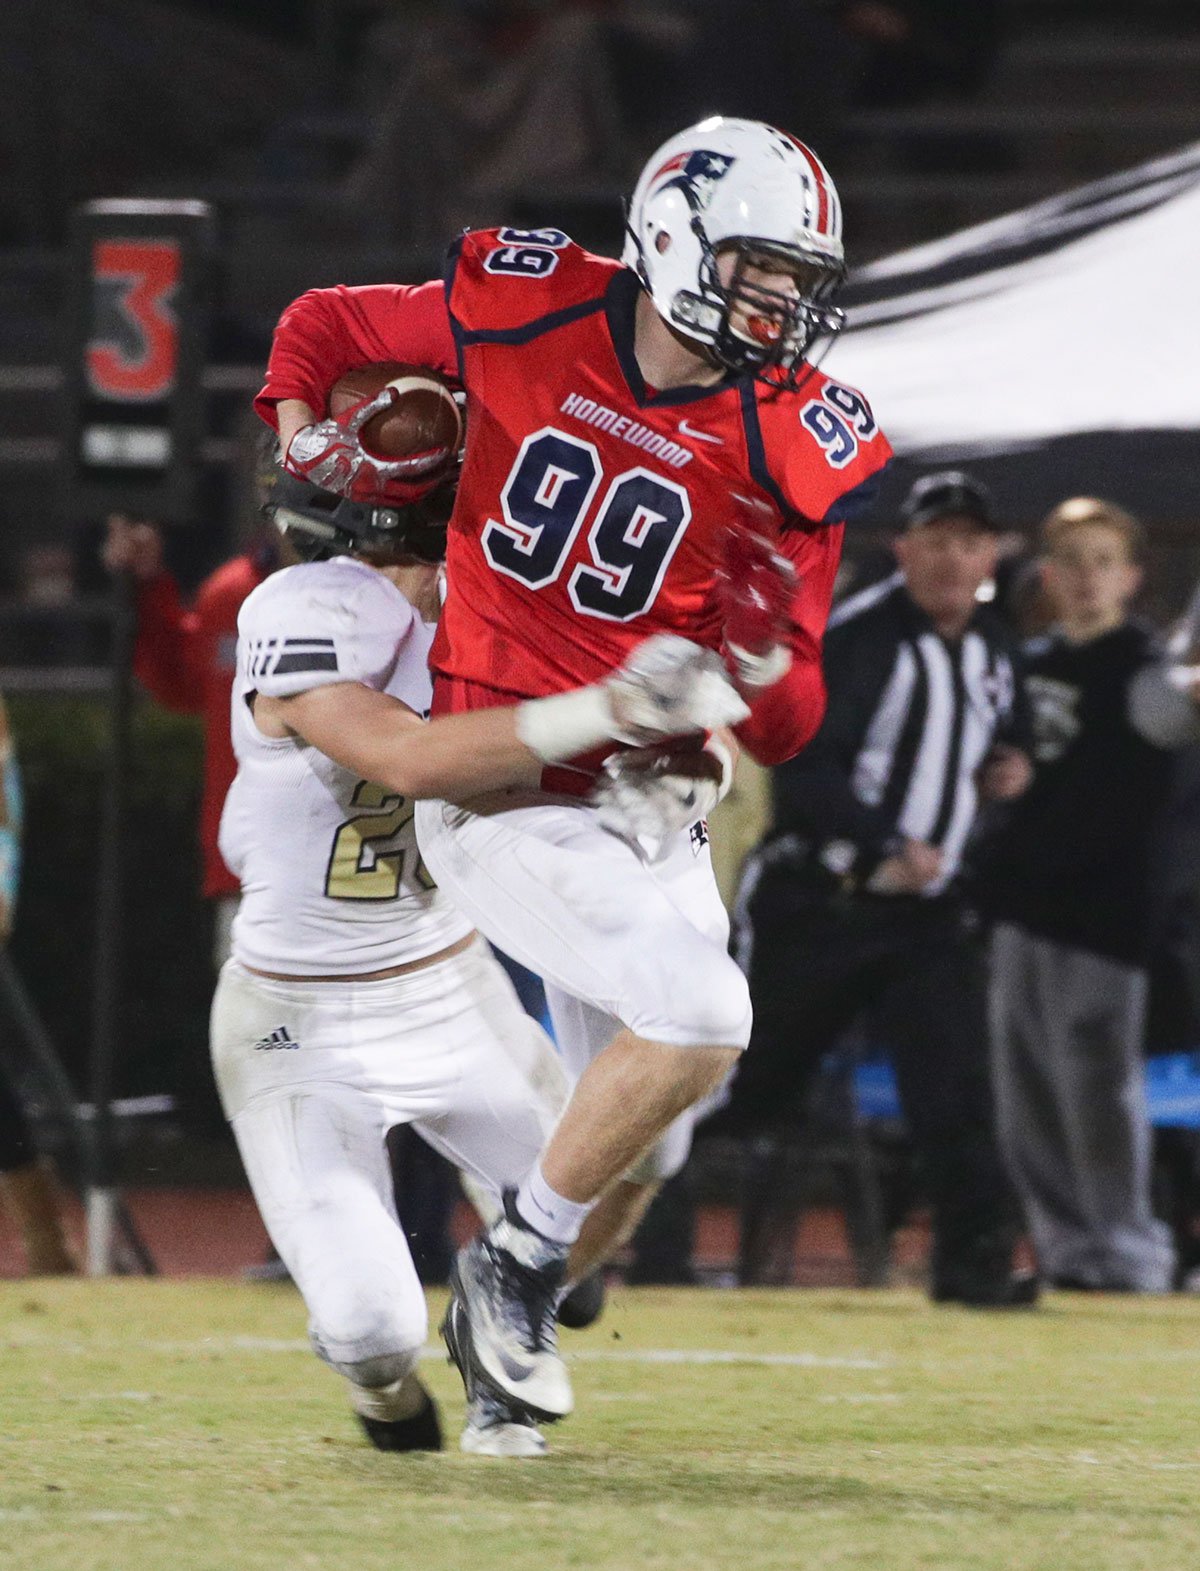 From the archives: Homewood storms back to beat Fort Payne